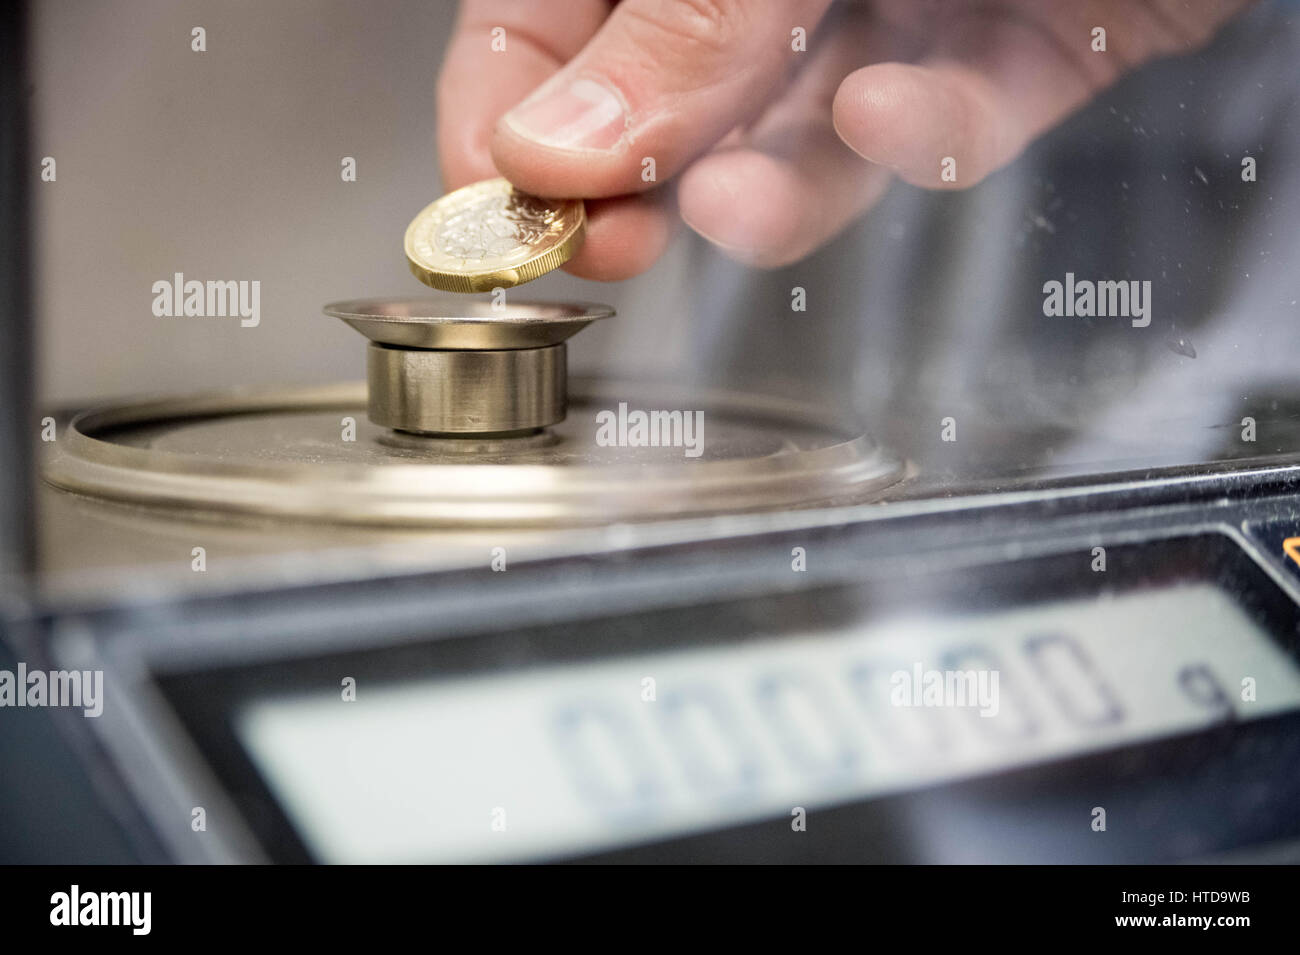 London, UK. 9th Mar, 2017. New £1 coins tested in the London Assay office ahead of their release 28th March, 2017. Pictured: Chris Walne, the Laboratory Manager, The Goldsmiths' Company Assay Office, weighs one of the new 12 sided pound coins on the Analytical Balances. It needs to be 8.75g or within certain tolerance of that. The new coin is lighter than the current coin by .75g. Credit: Guy Corbishley/Alamy Live News Stock Photo